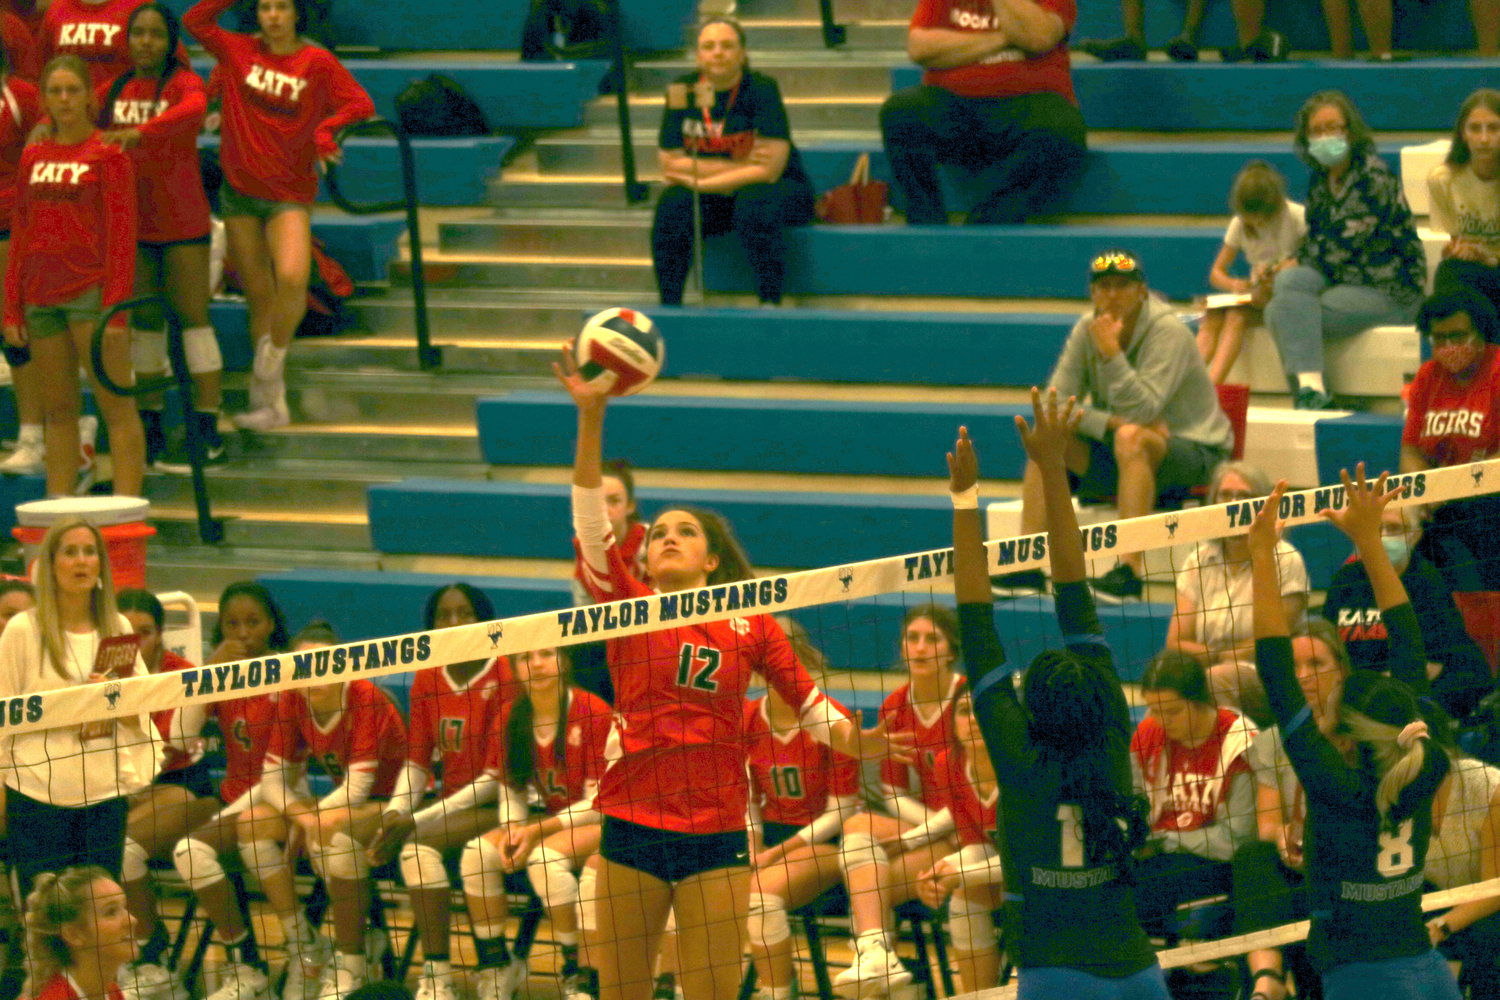 Nyla Wold tries to tip the ball over the net during a District 19-6A match between Katy and Taylor at the Taylor gym.